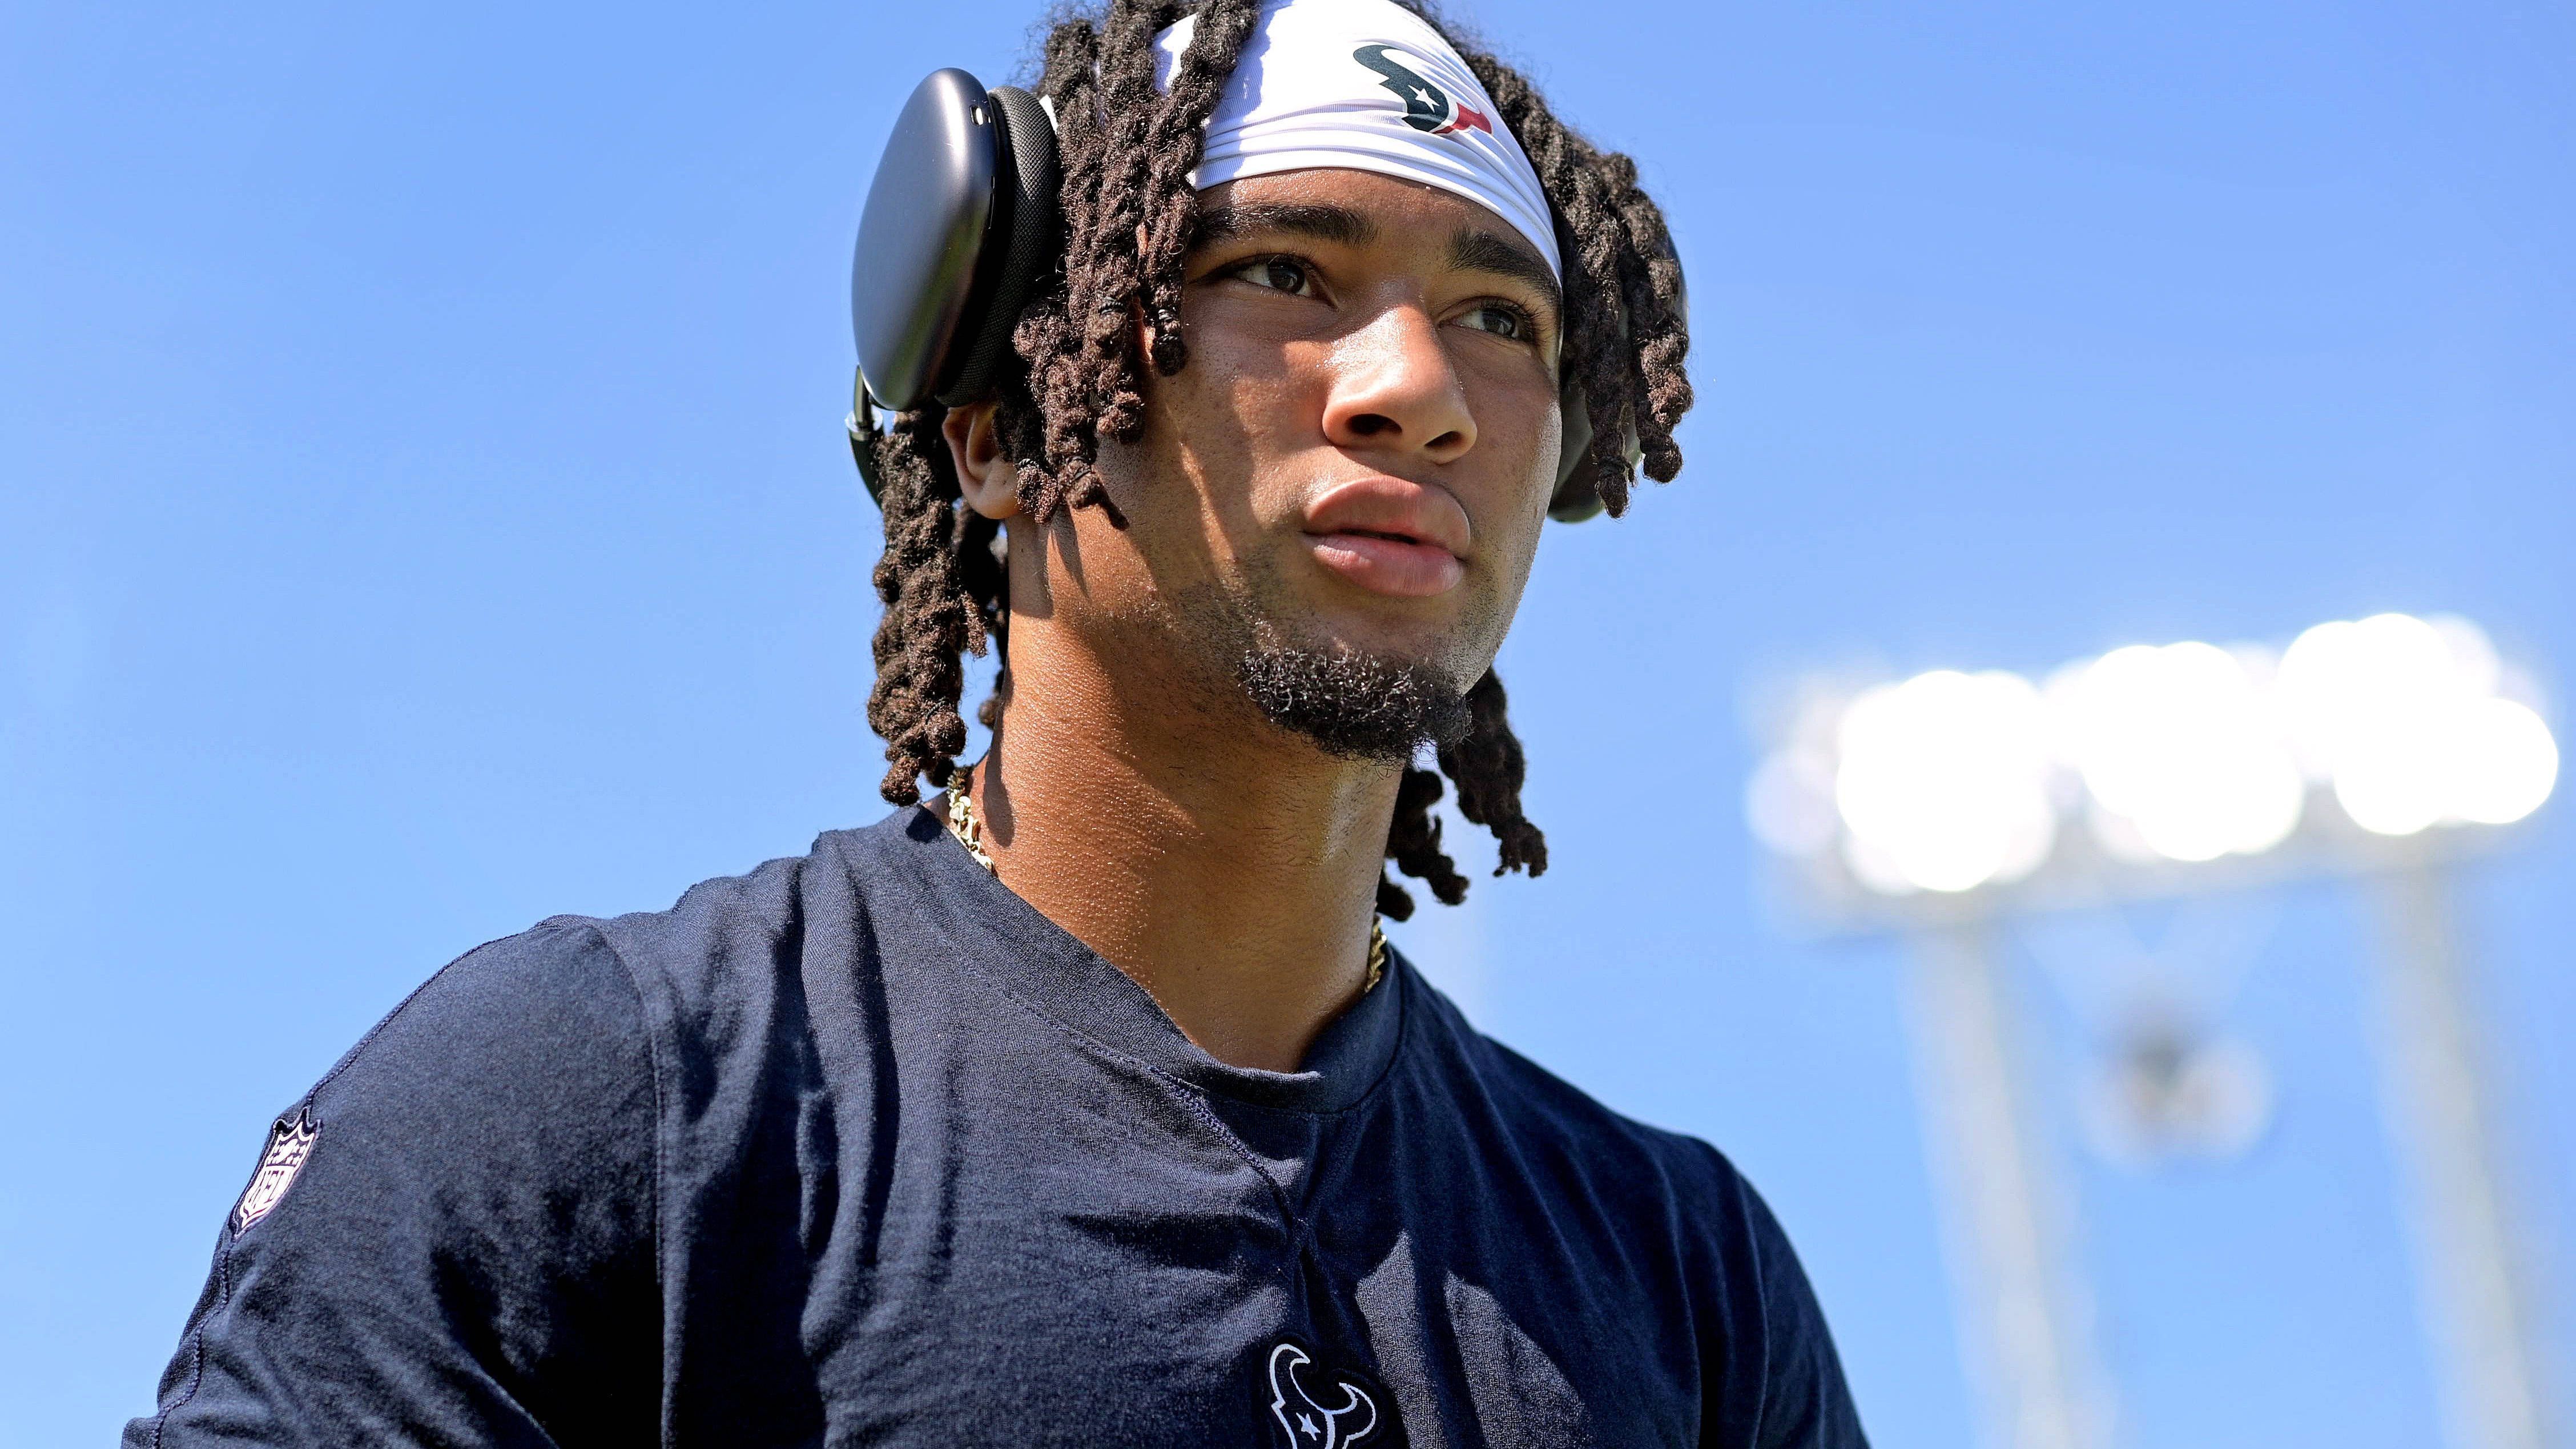 <strong>Offensive Rookie of the Year</strong><br>C.J. Stroud, Houston Texans, Quarterback<br><strong>Wahlergebnis mit Punkteabstufung 5-3-1:</strong> <br>1. Stroud, 48-2-0 = 246<br>2. Puka Nacua, Wide Receiver, Rams, 2-48-0 = 154<br>3. Sam LaPorta, Tight End, Lions, 0-0-40 = 40<br>4. Jahmyr Gibbs, Running Back, Lions, 0-0-4 = 4<br>5. Bijan Robinson, Running Back, Falcons, 0-0-3 = 3